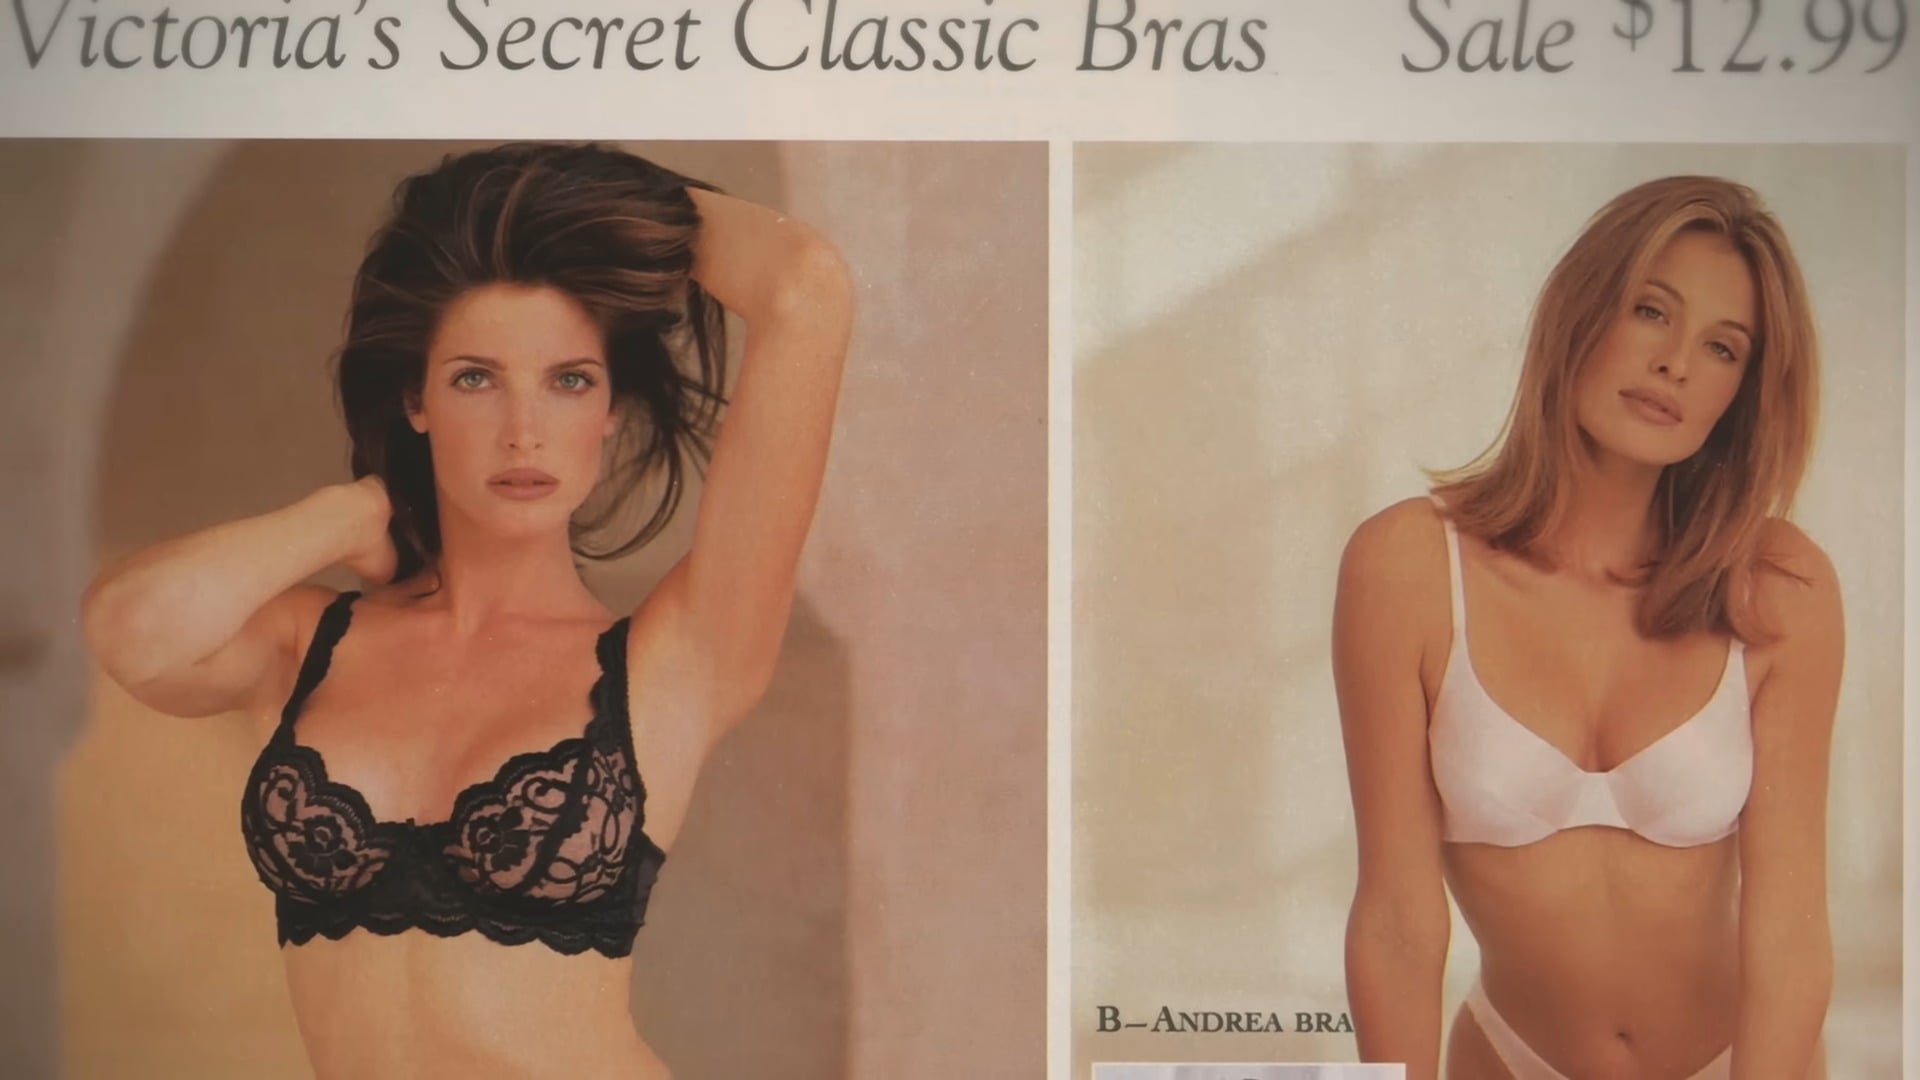 6 Revelations From Victoria's Secret: Angels and Demons